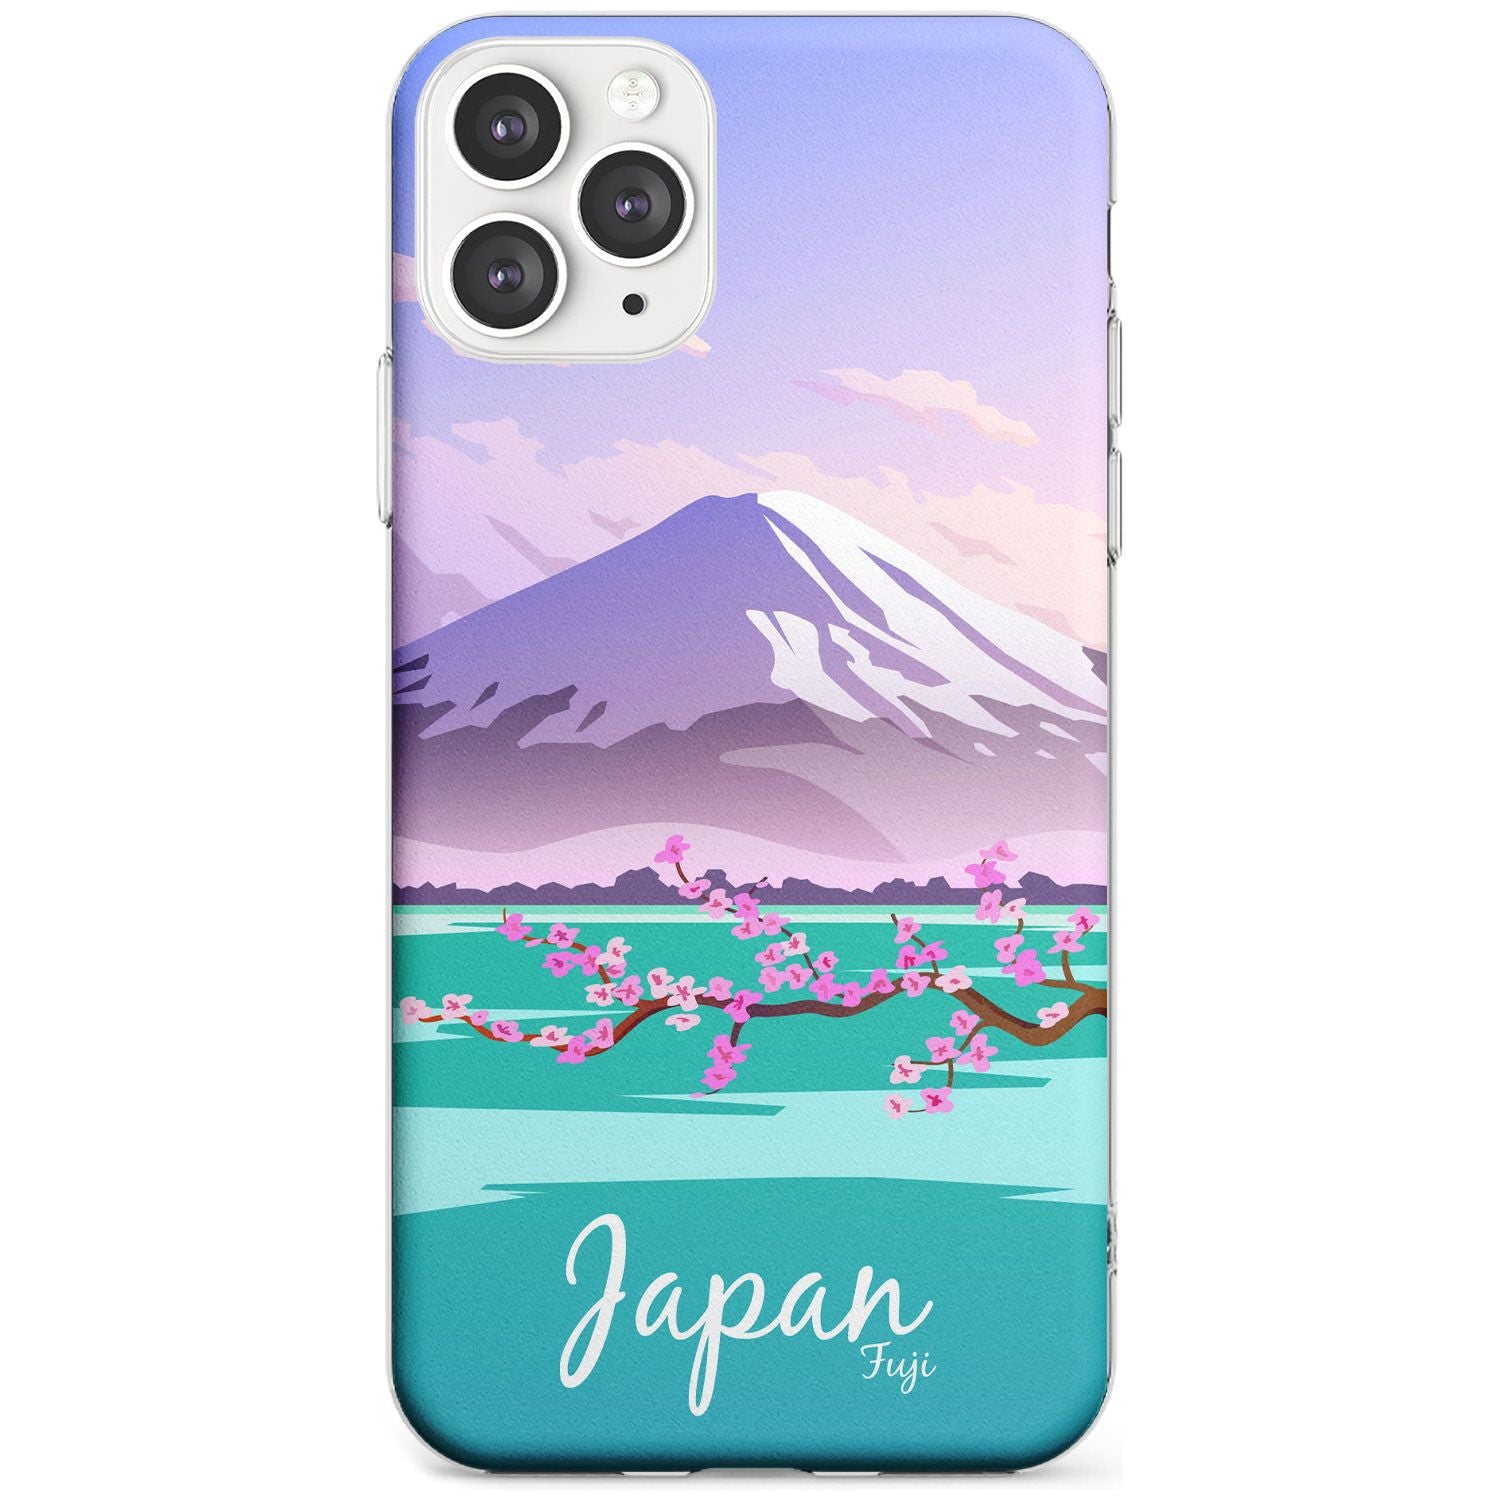 Vintage Travel Poster Japan Slim TPU Phone Case for iPhone 11 Pro Max